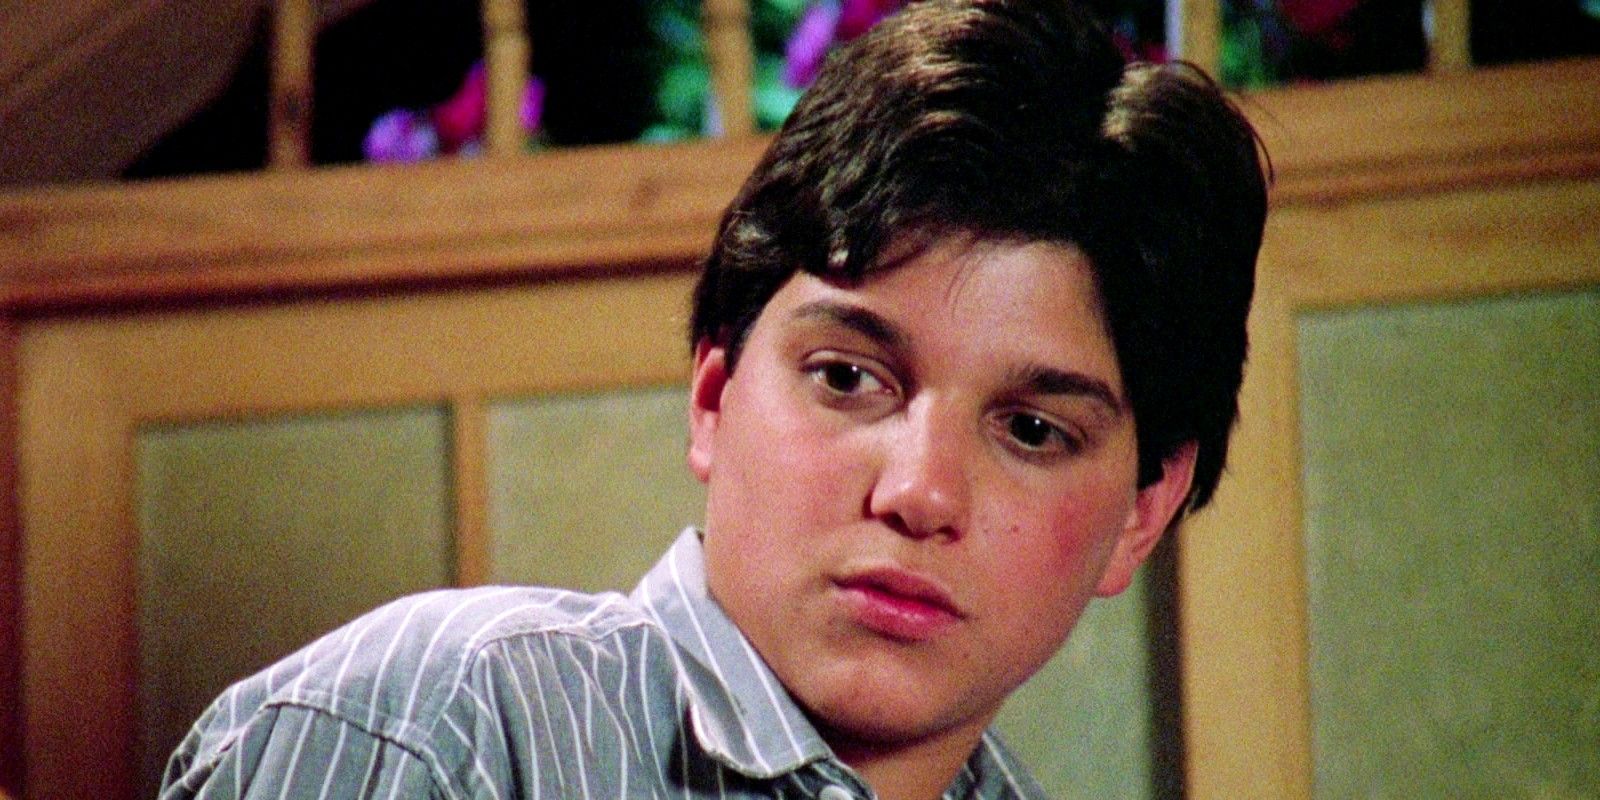 Ralph Macchio as Daniel LaRusso in The Karate Kid 3 looking down